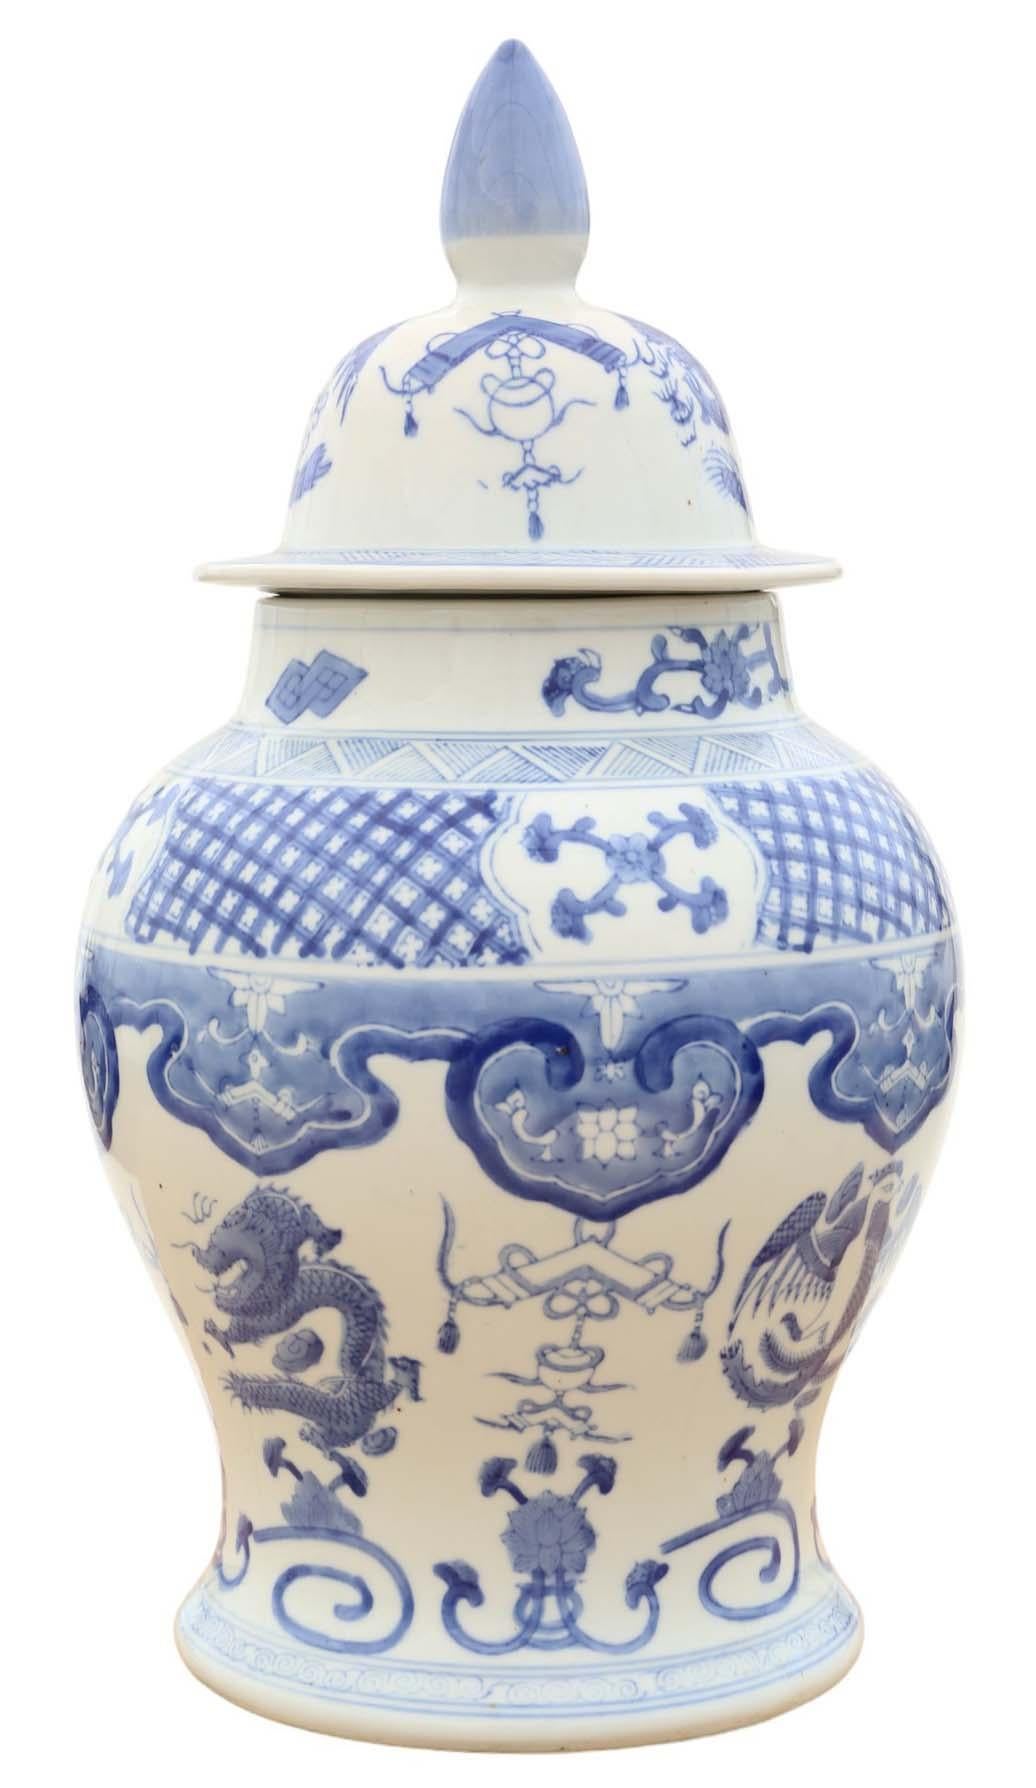 Antique large blue and white Chinese Oriental ceramic ginger jar with a lid, believed to date from the early 20th Century. It bears a 4-character mark on the base.

This piece is exceptionally decorative and would enhance any suitable